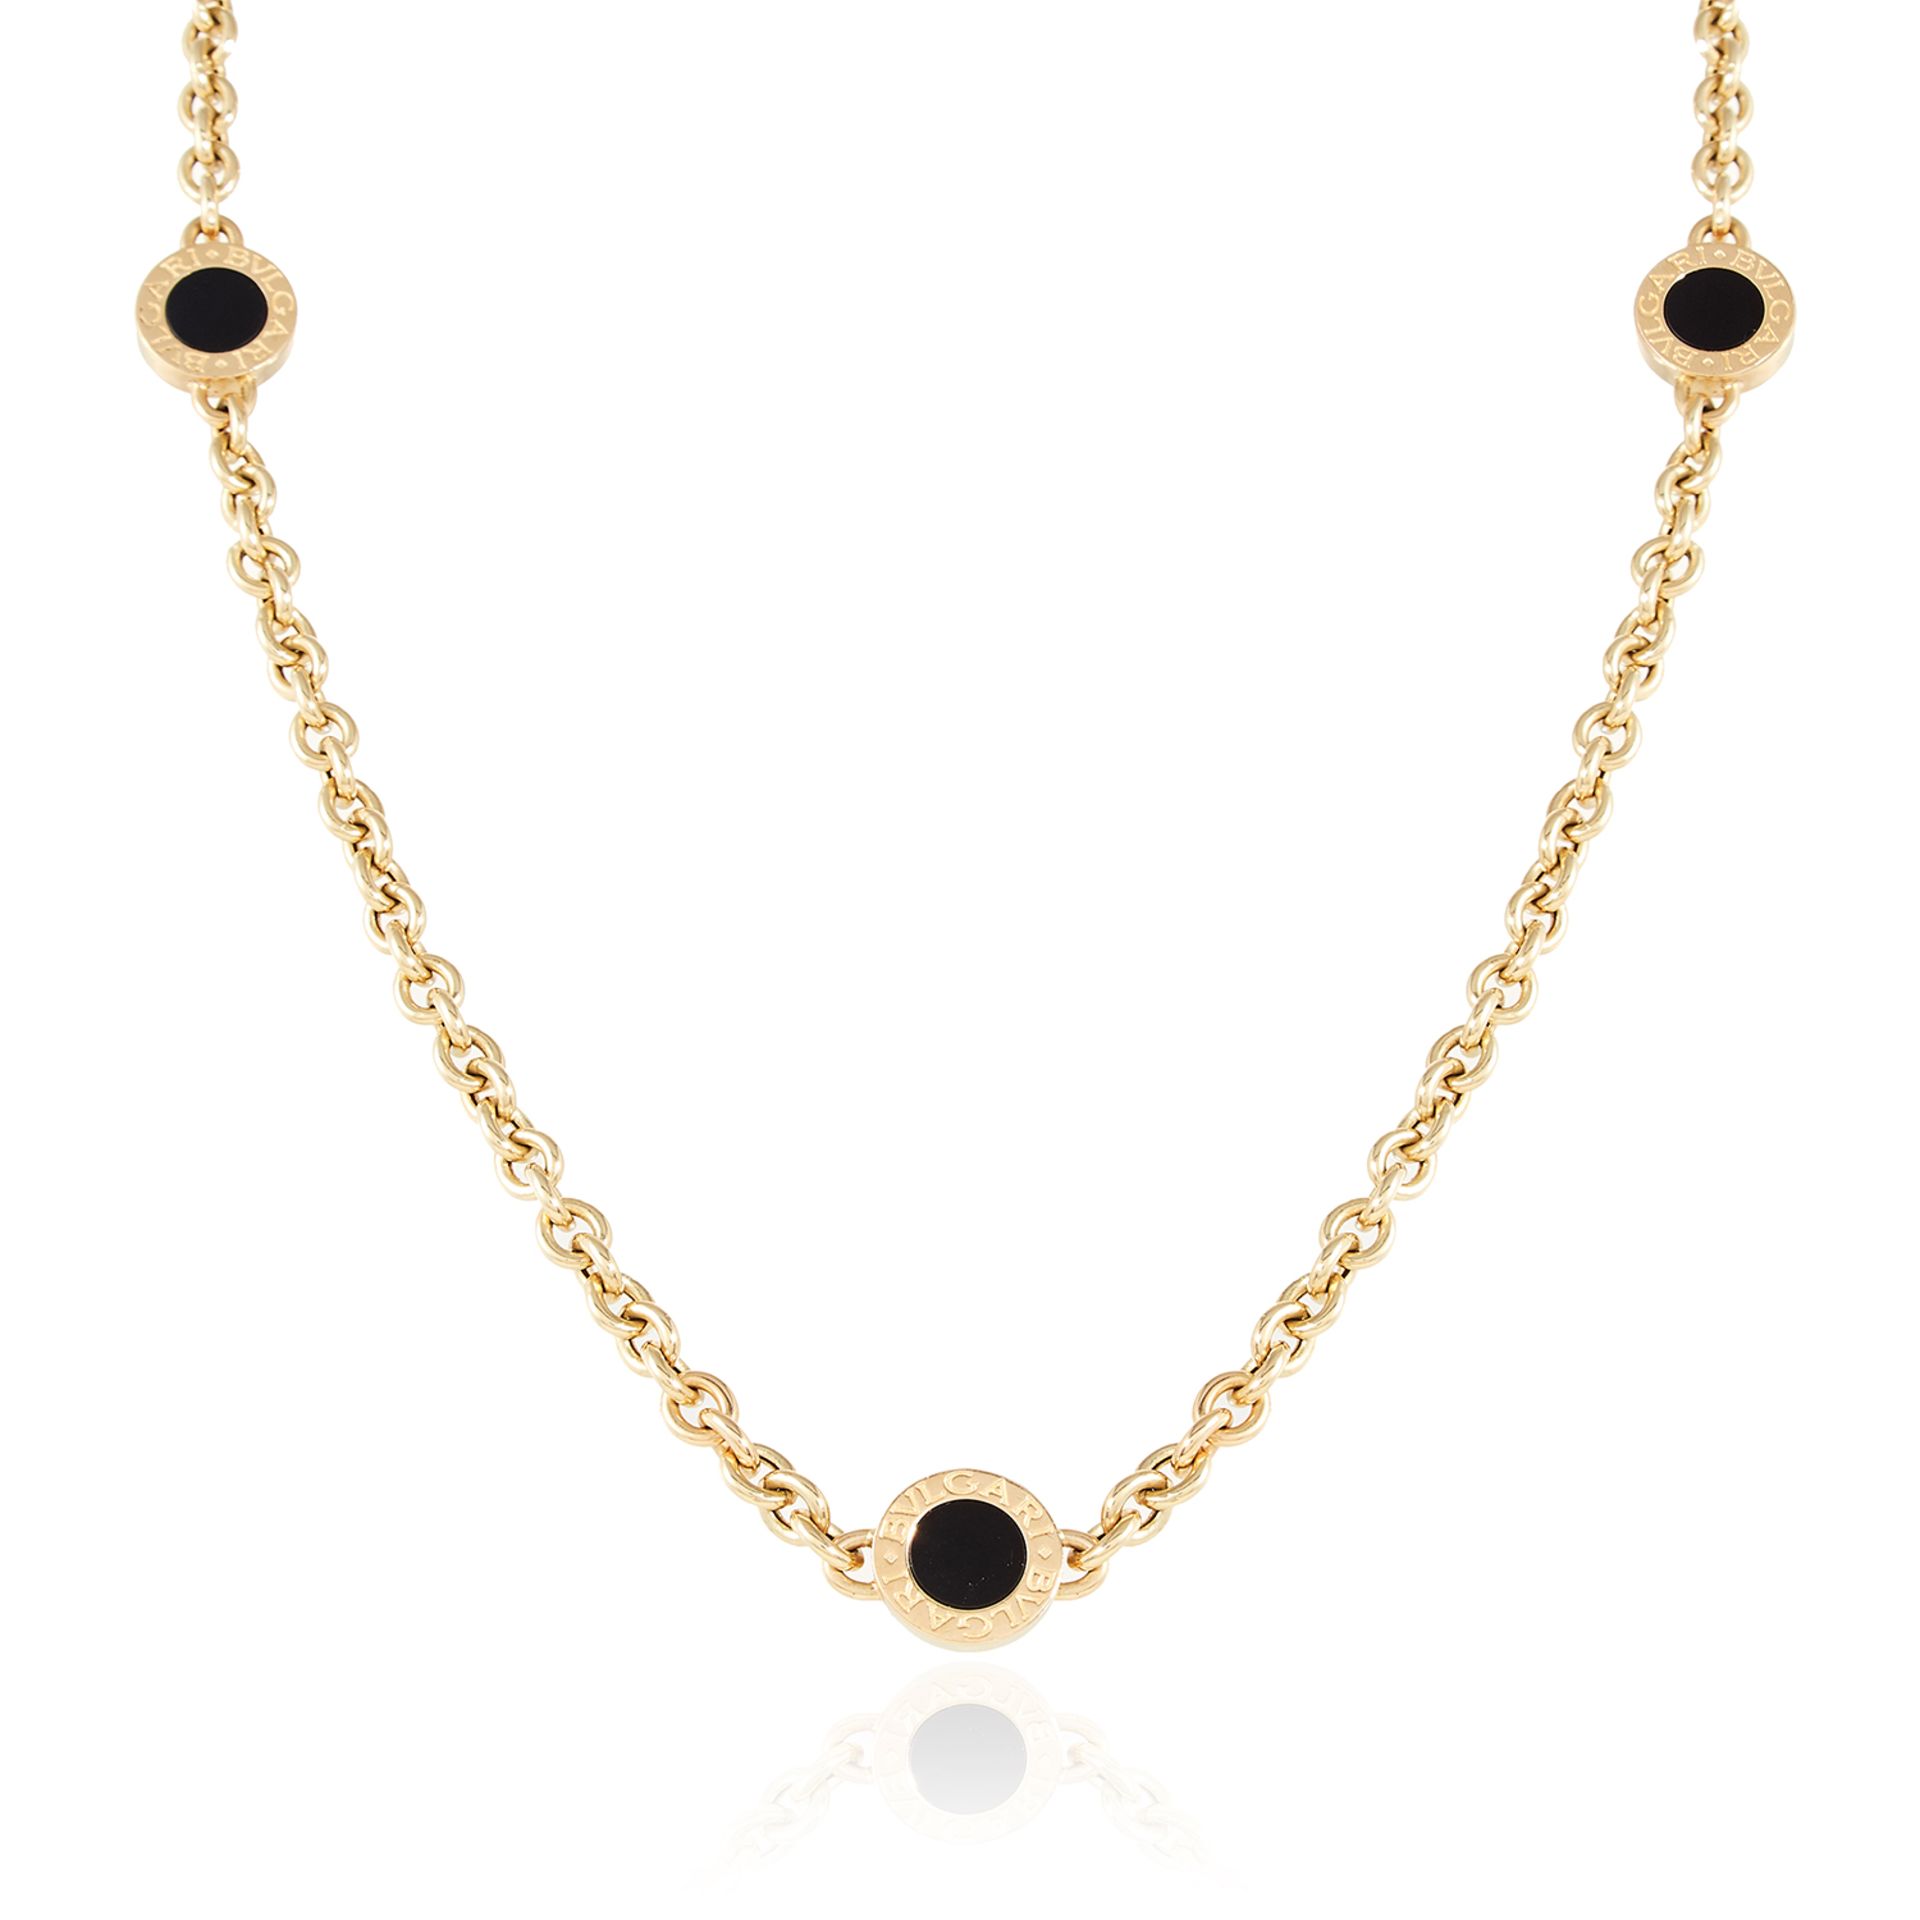 AN ONYX LINK NECKLACE, BULGARI in 18ct yellow gold, comprising of six onyx Bvlgari links signed